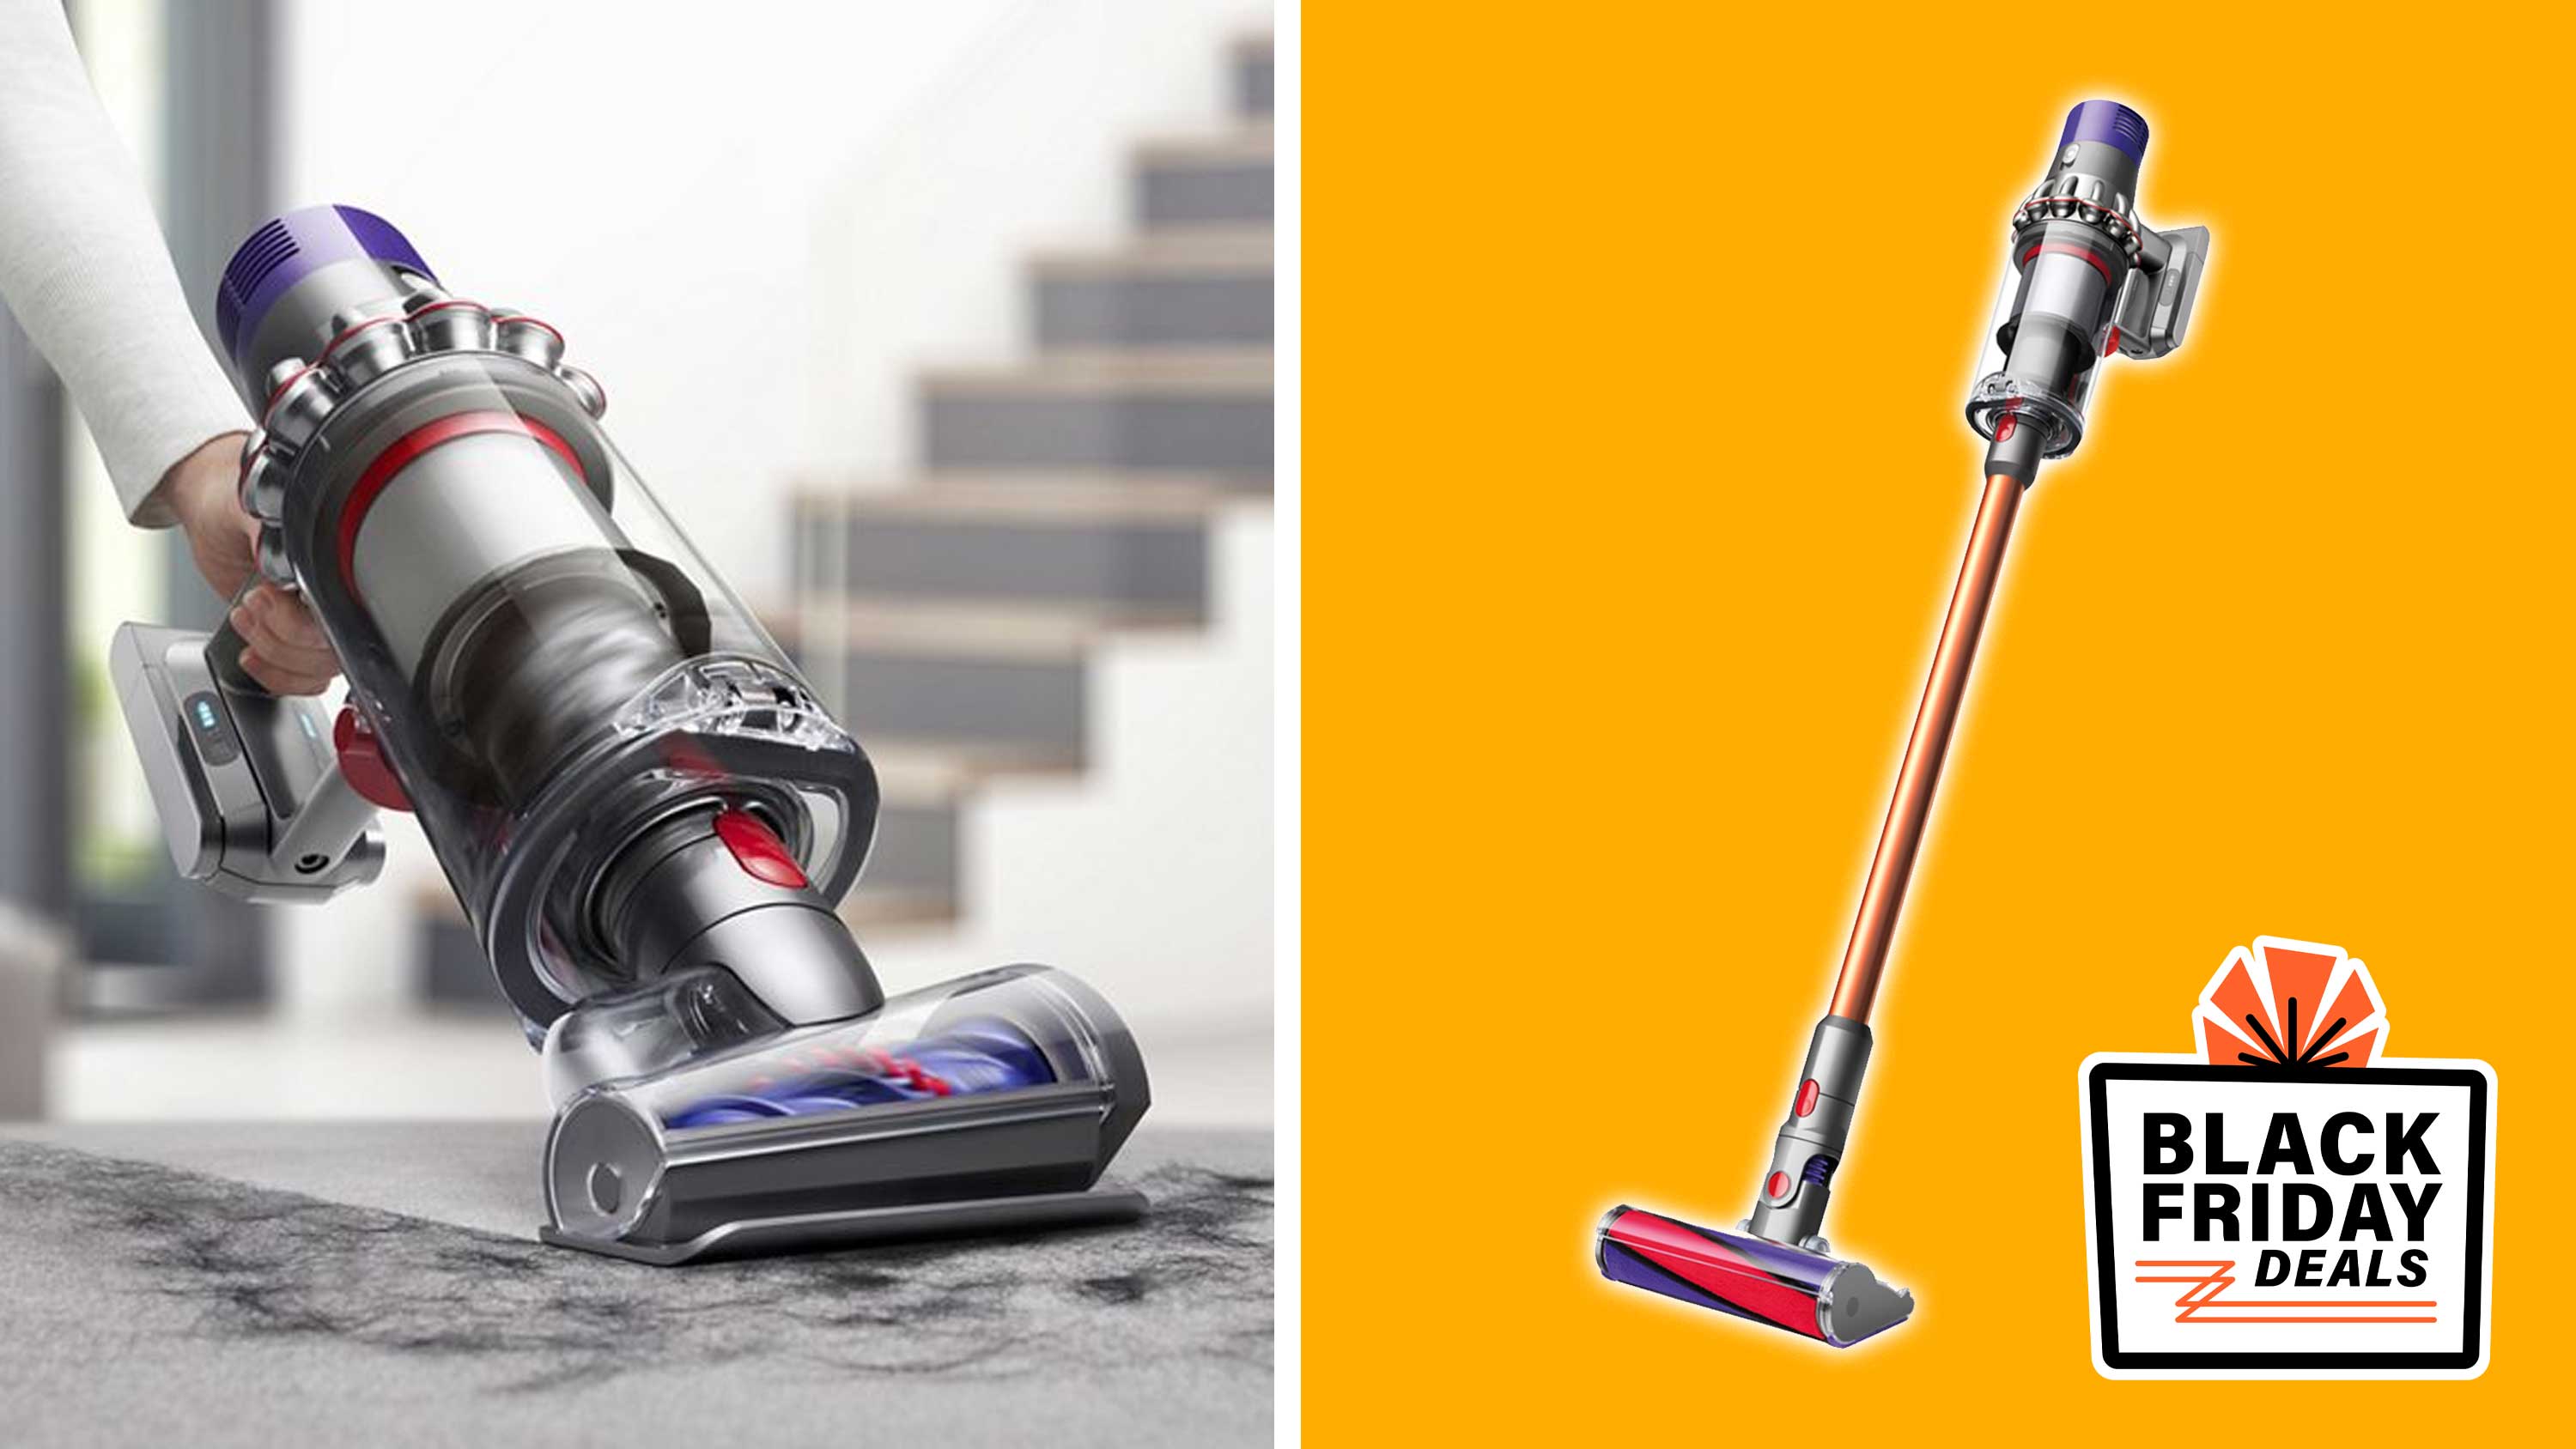 Dyson Friday deal: Save $150 on the Cyclone V10 Absolute vacuum